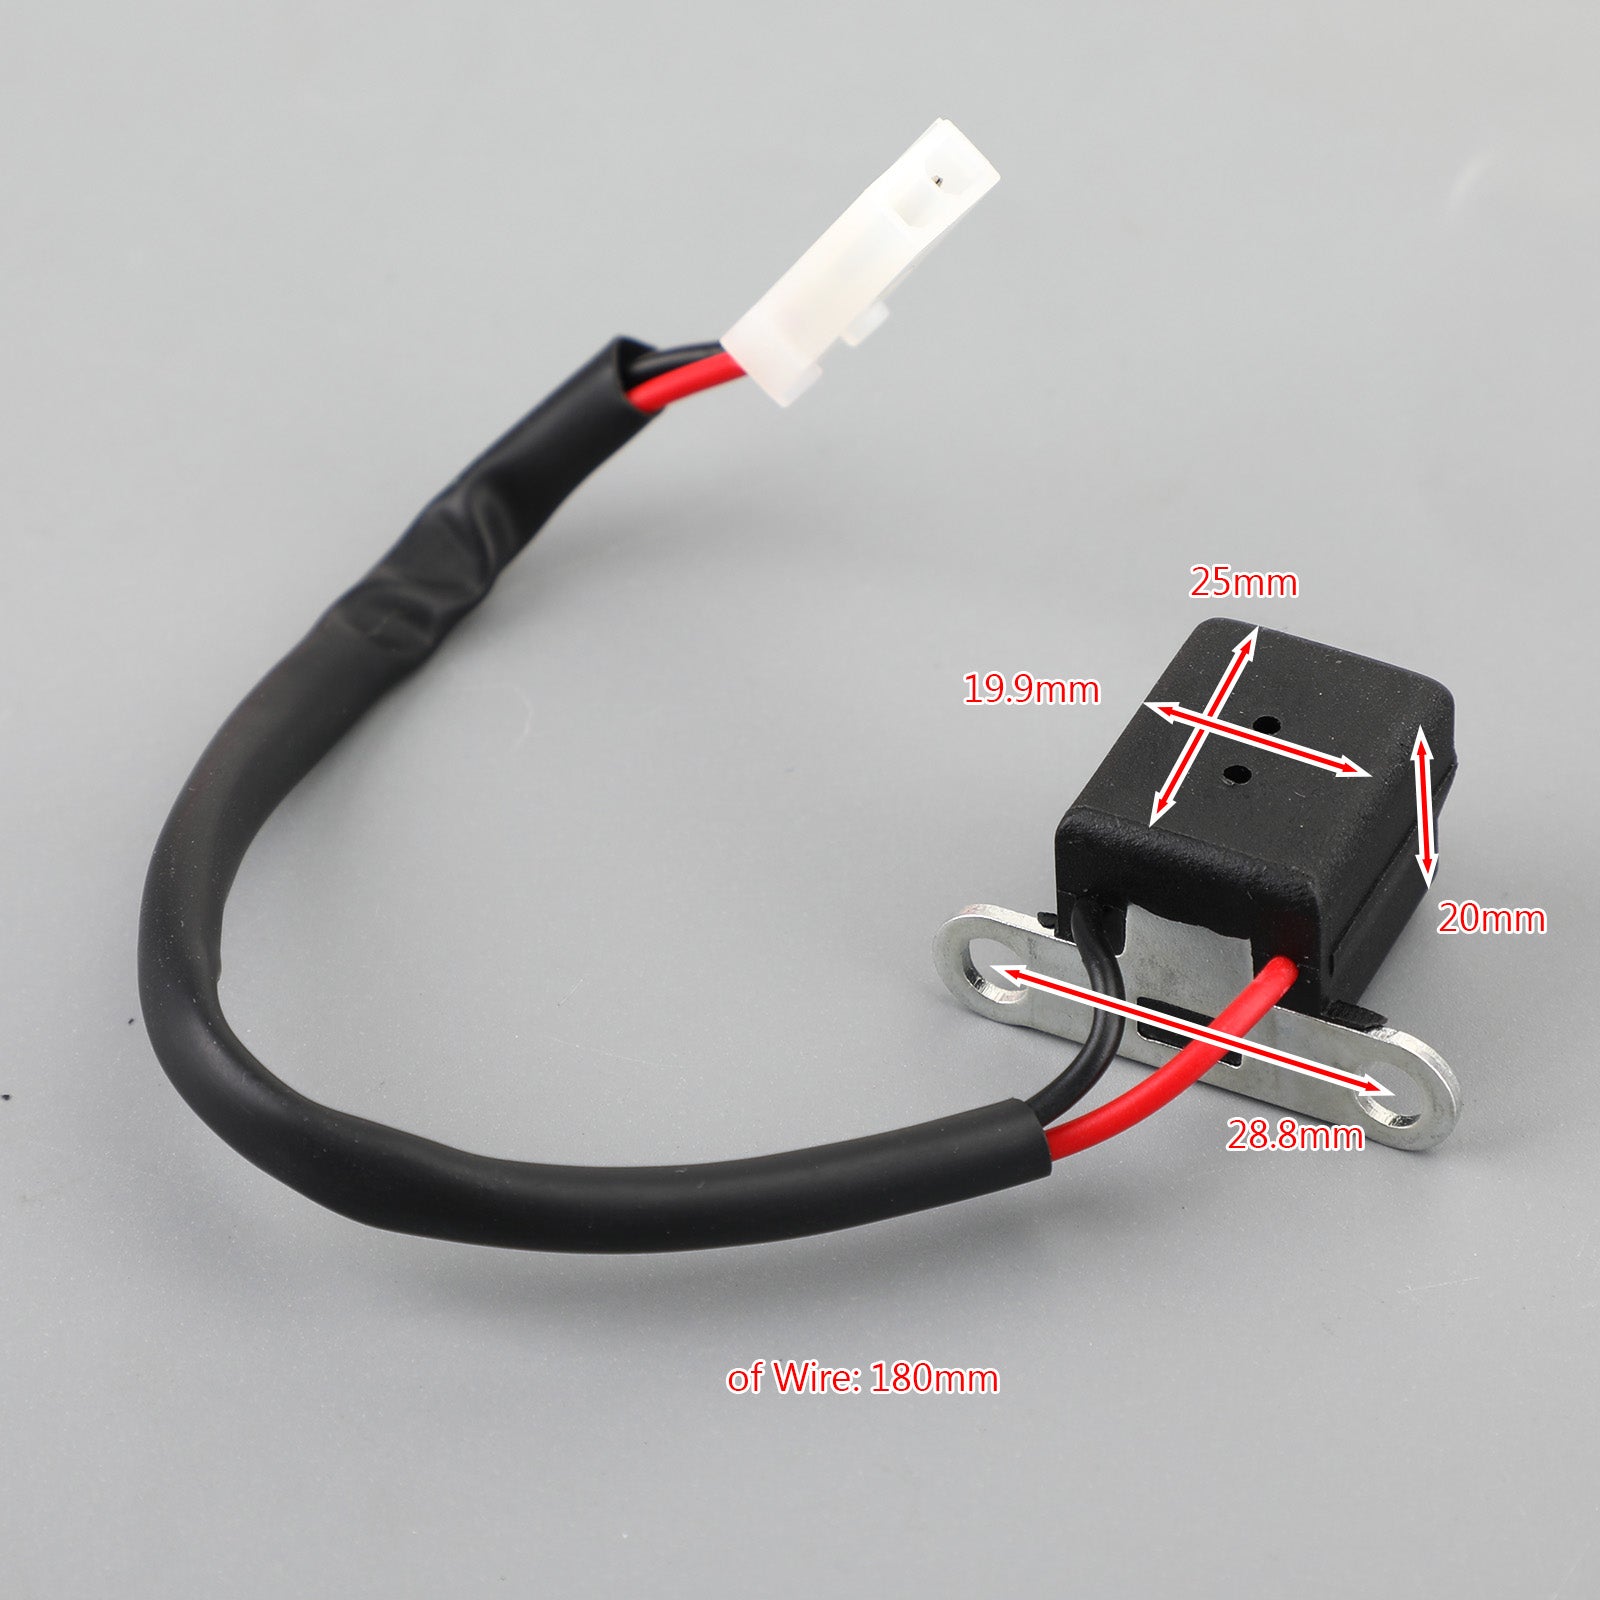 4 Cycle Ignition Pickup PULSAR COIL Fit for EZGO Golf Cart 1991-2003 26651-G02 Generic